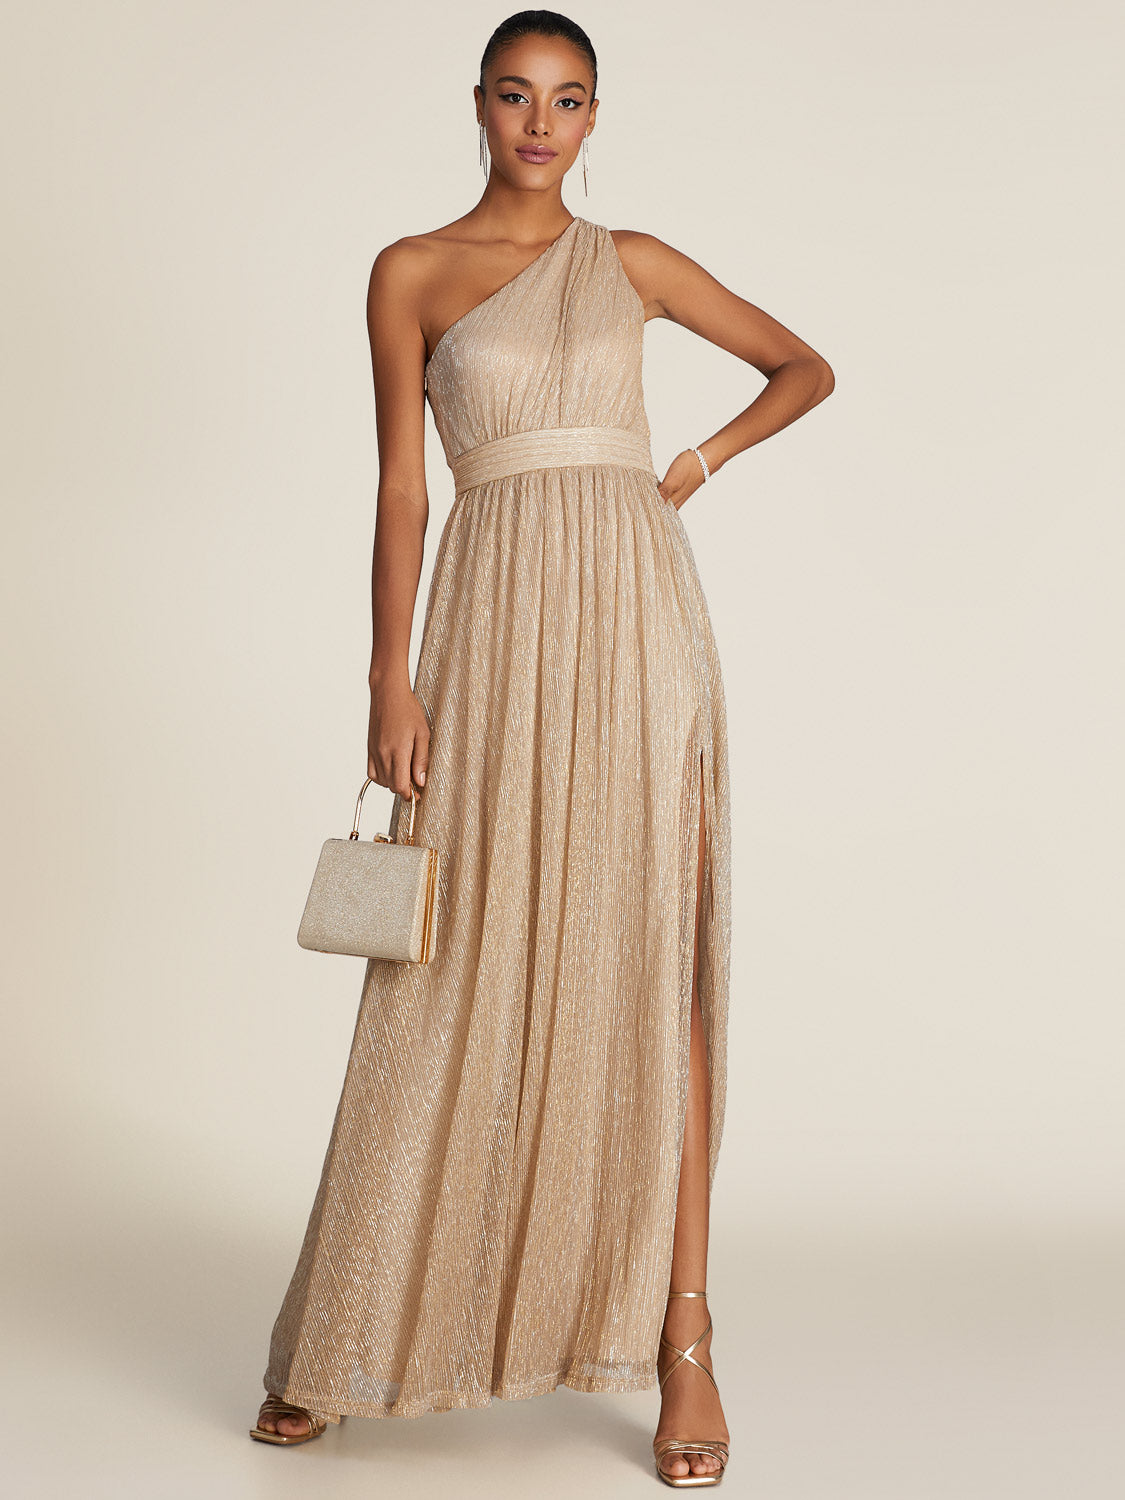 One-Shoulder Metallic Gown With Front Cutout